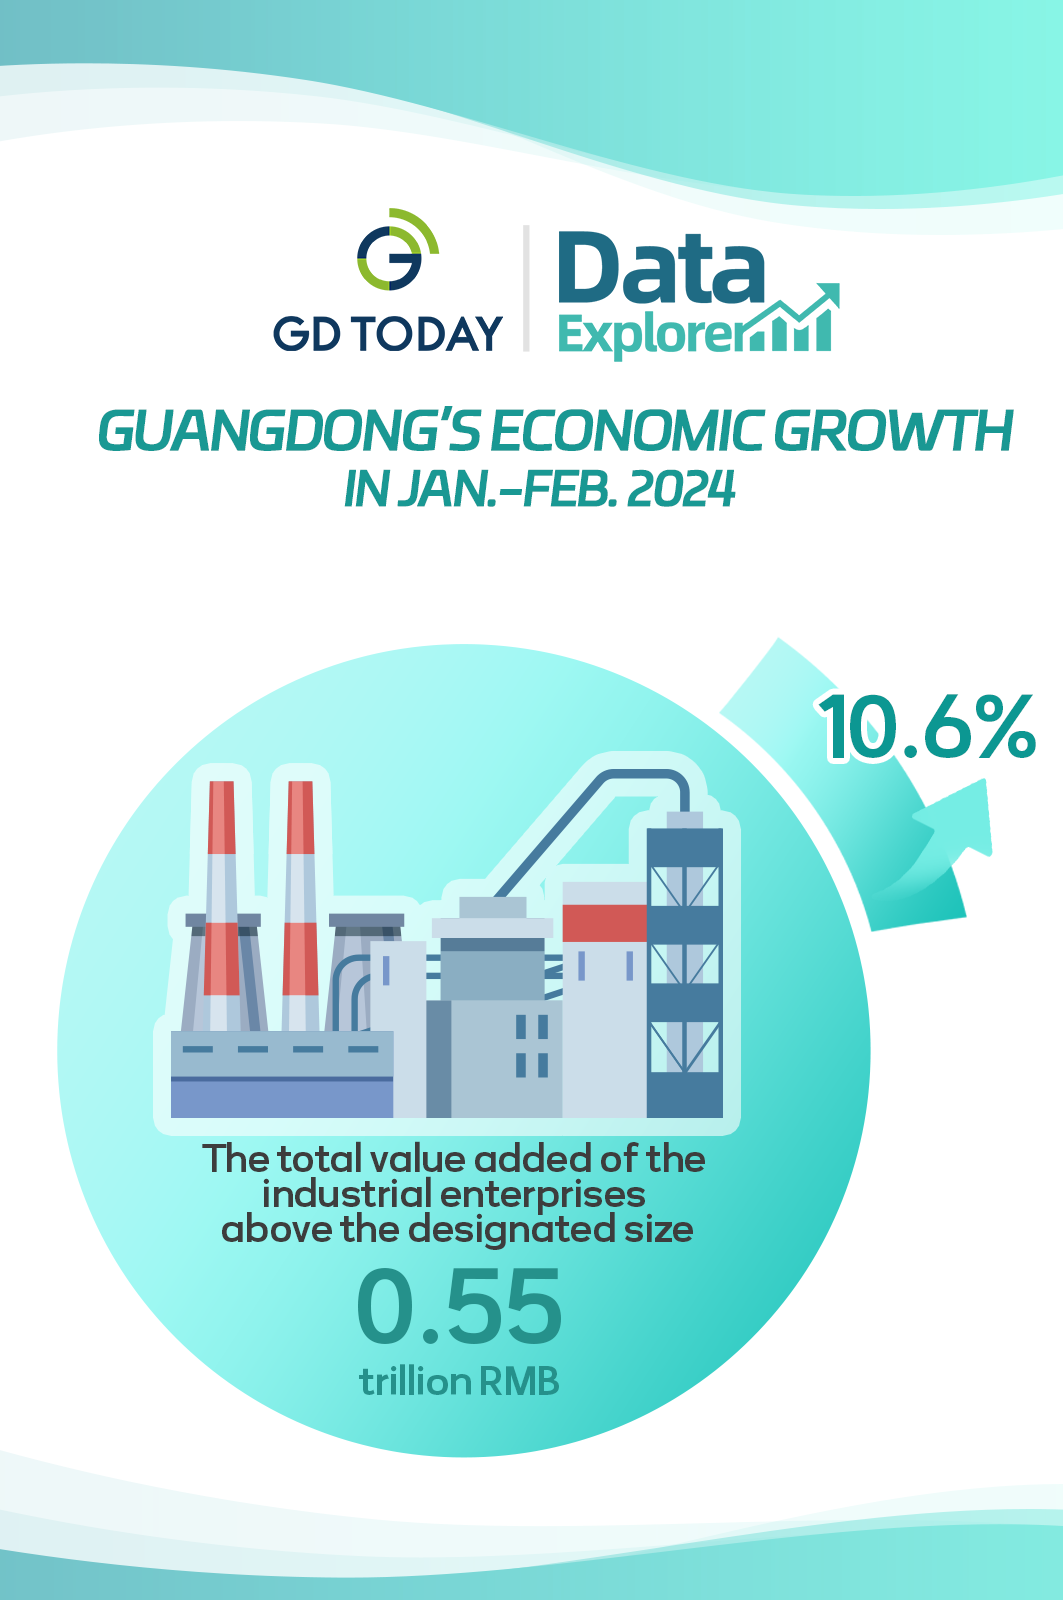 Data Explorer | Guangdong’s economy sees smooth start in 2024 with double-digit growth in industrial output and investment